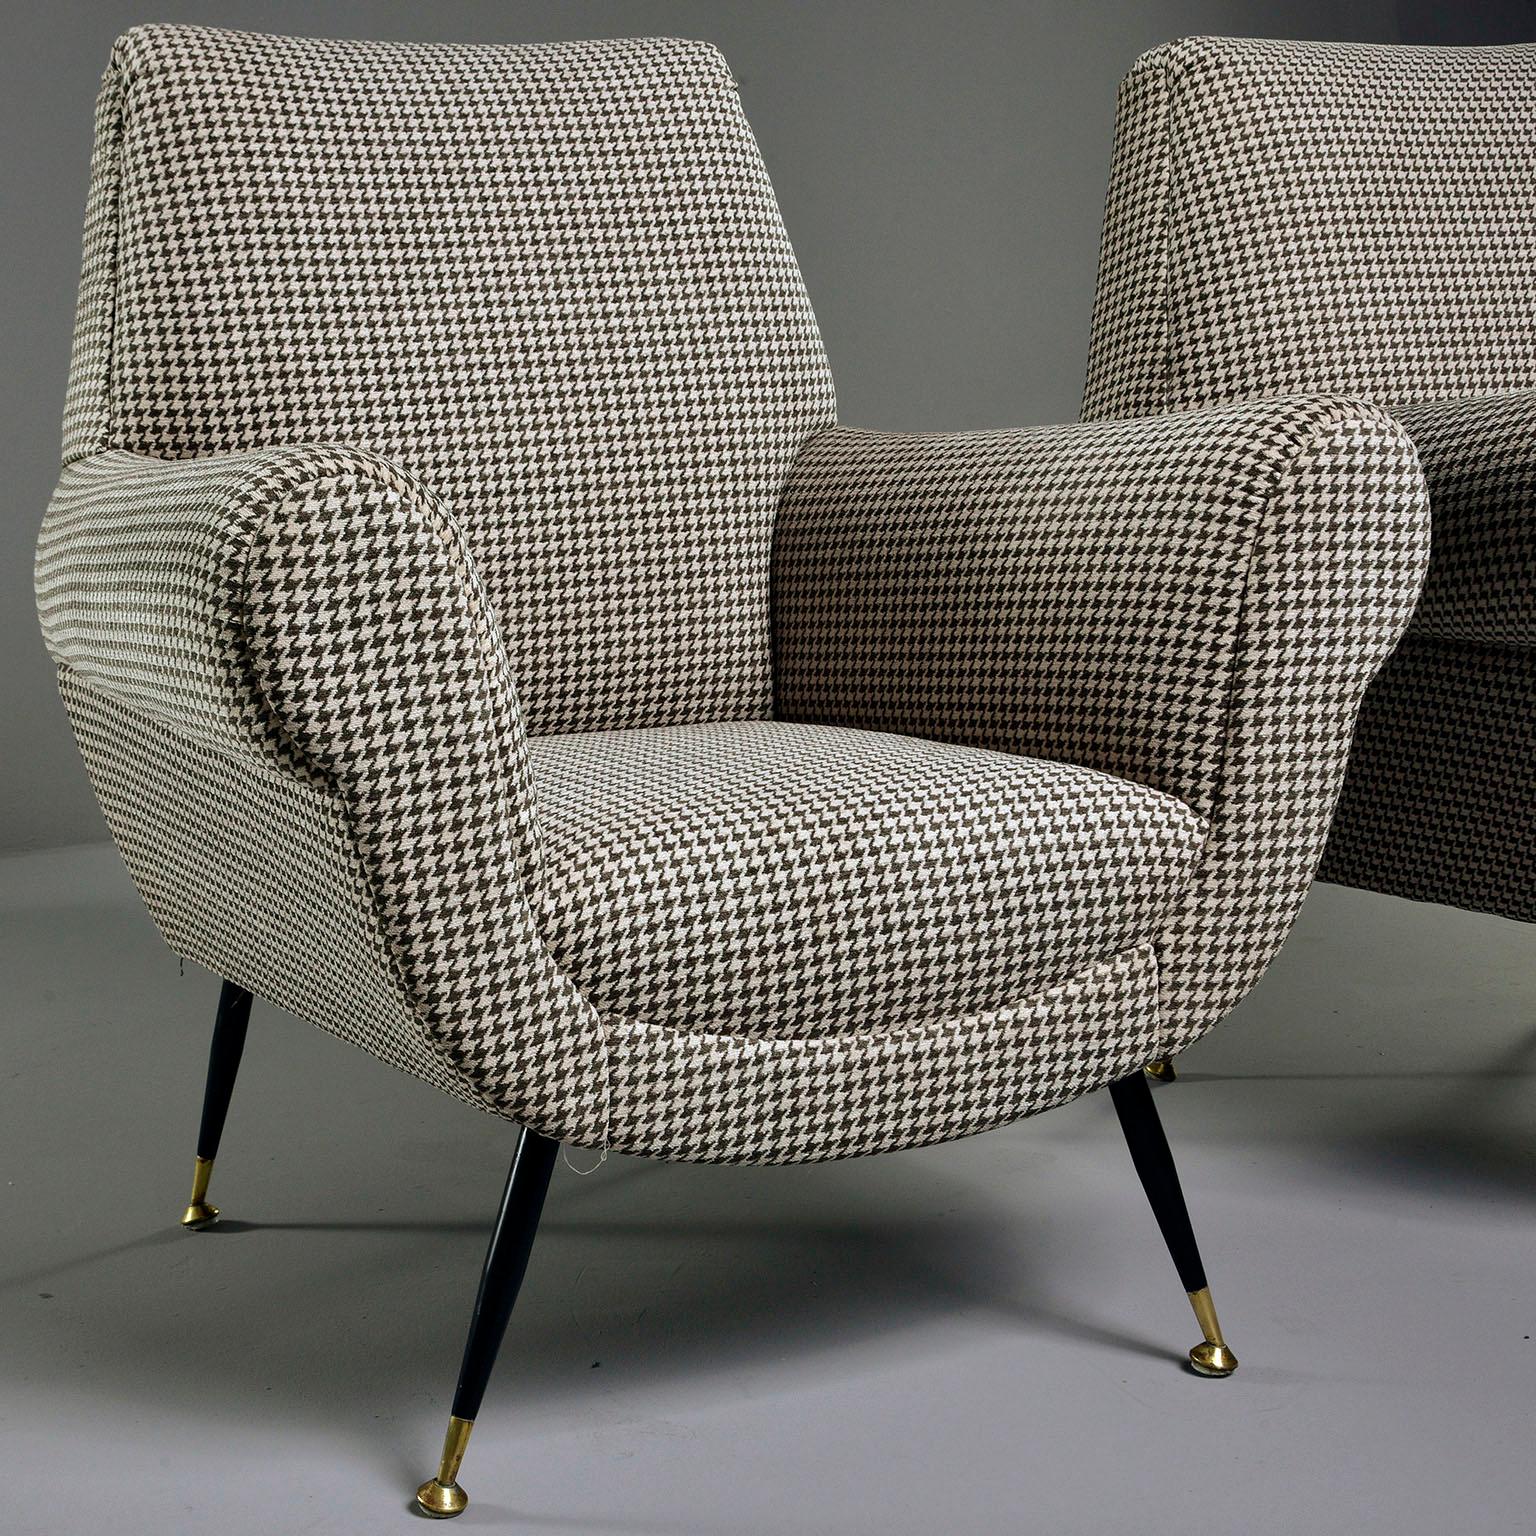 Wood Pair of Newly Upholstered Chairs by Gigi Radice for Minotti